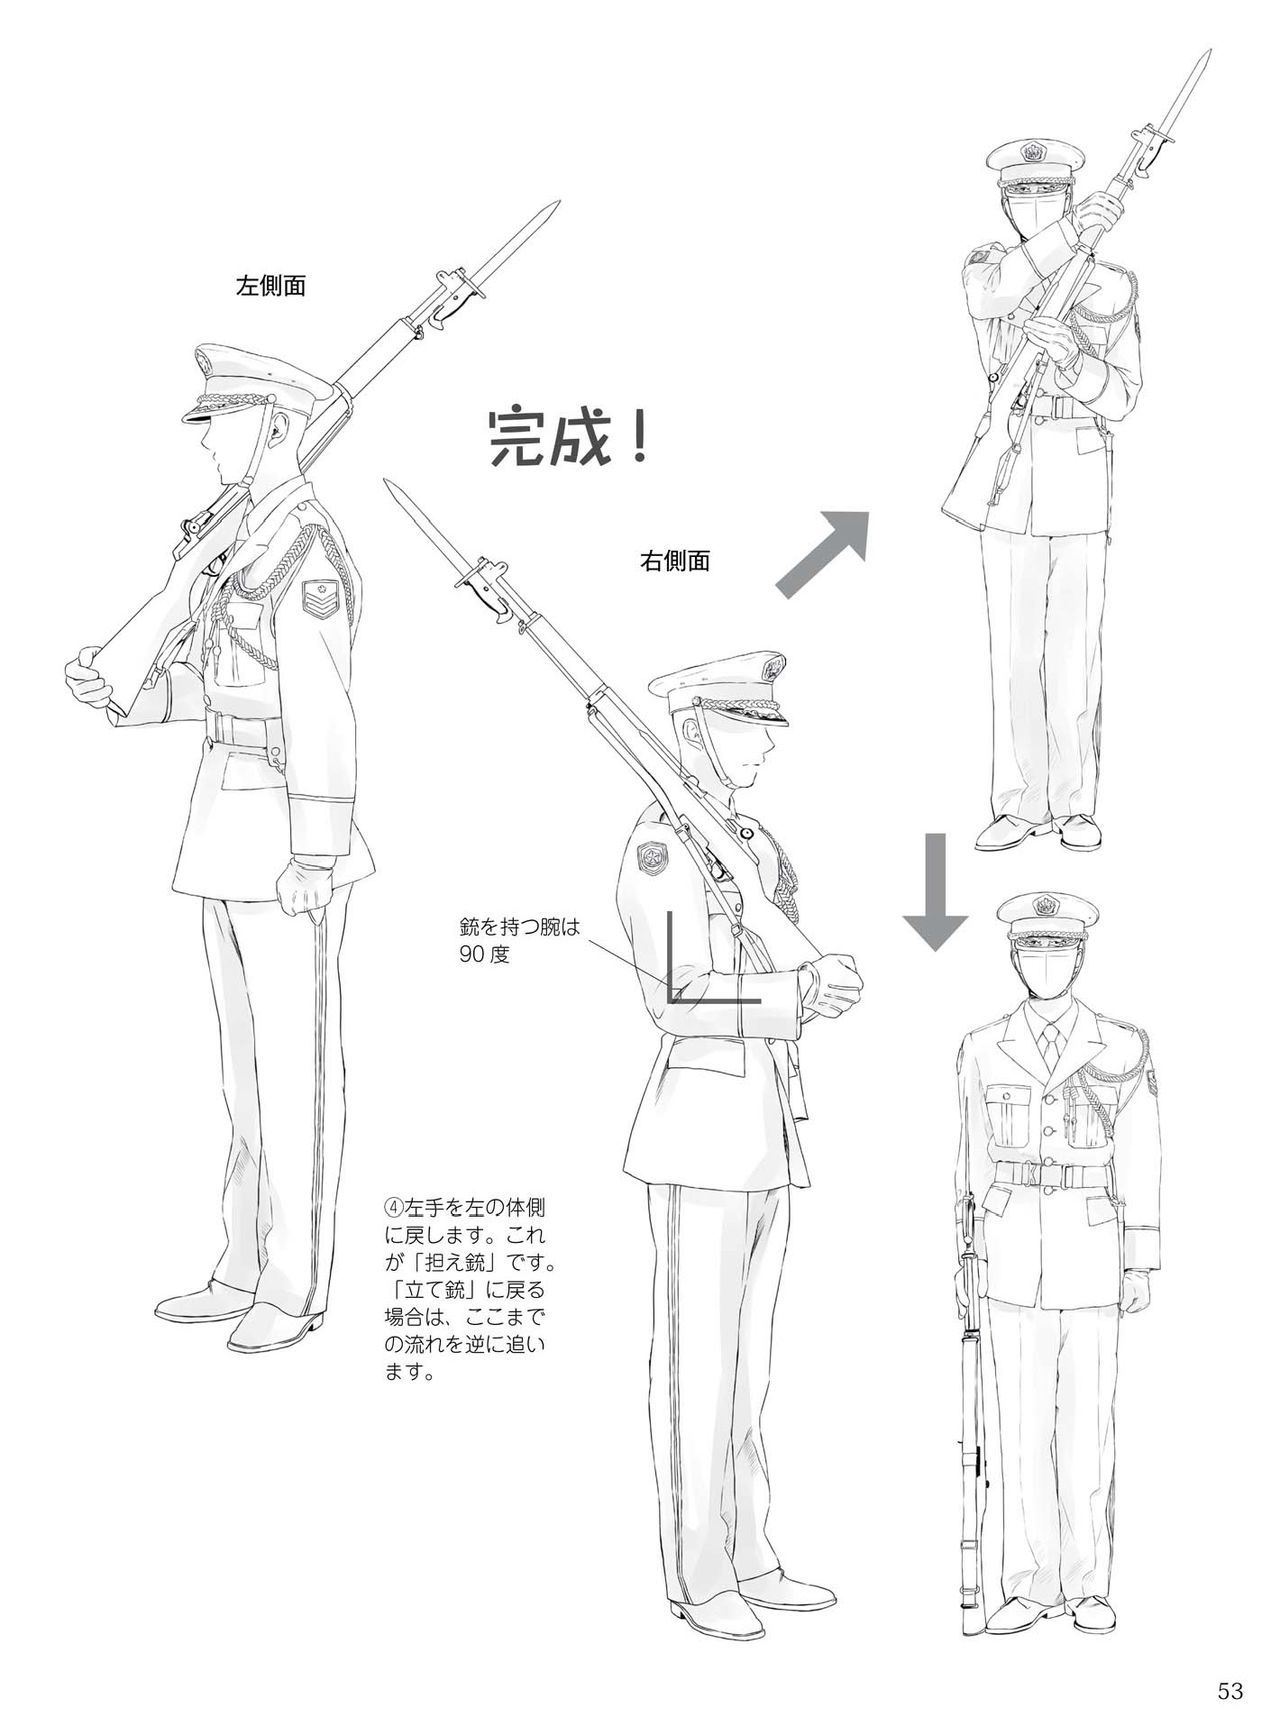 How to draw military uniforms and uniforms From Self-Defense Forces 軍服・制服の描き方 アメリカ軍・自衛隊の制服から戦闘服まで 56